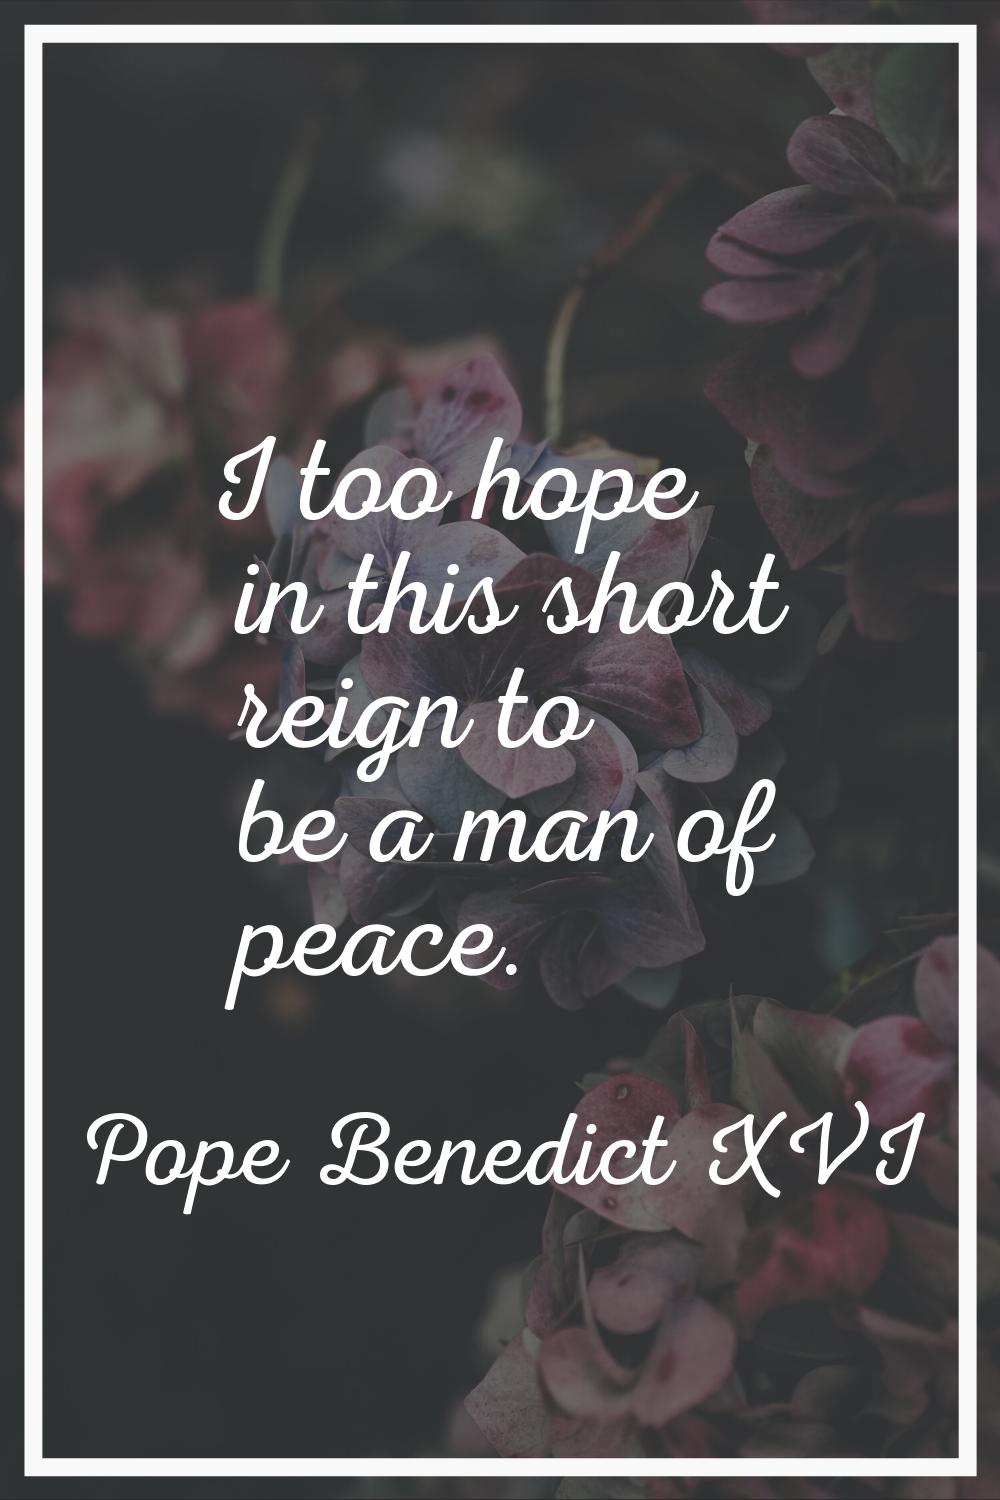 I too hope in this short reign to be a man of peace.